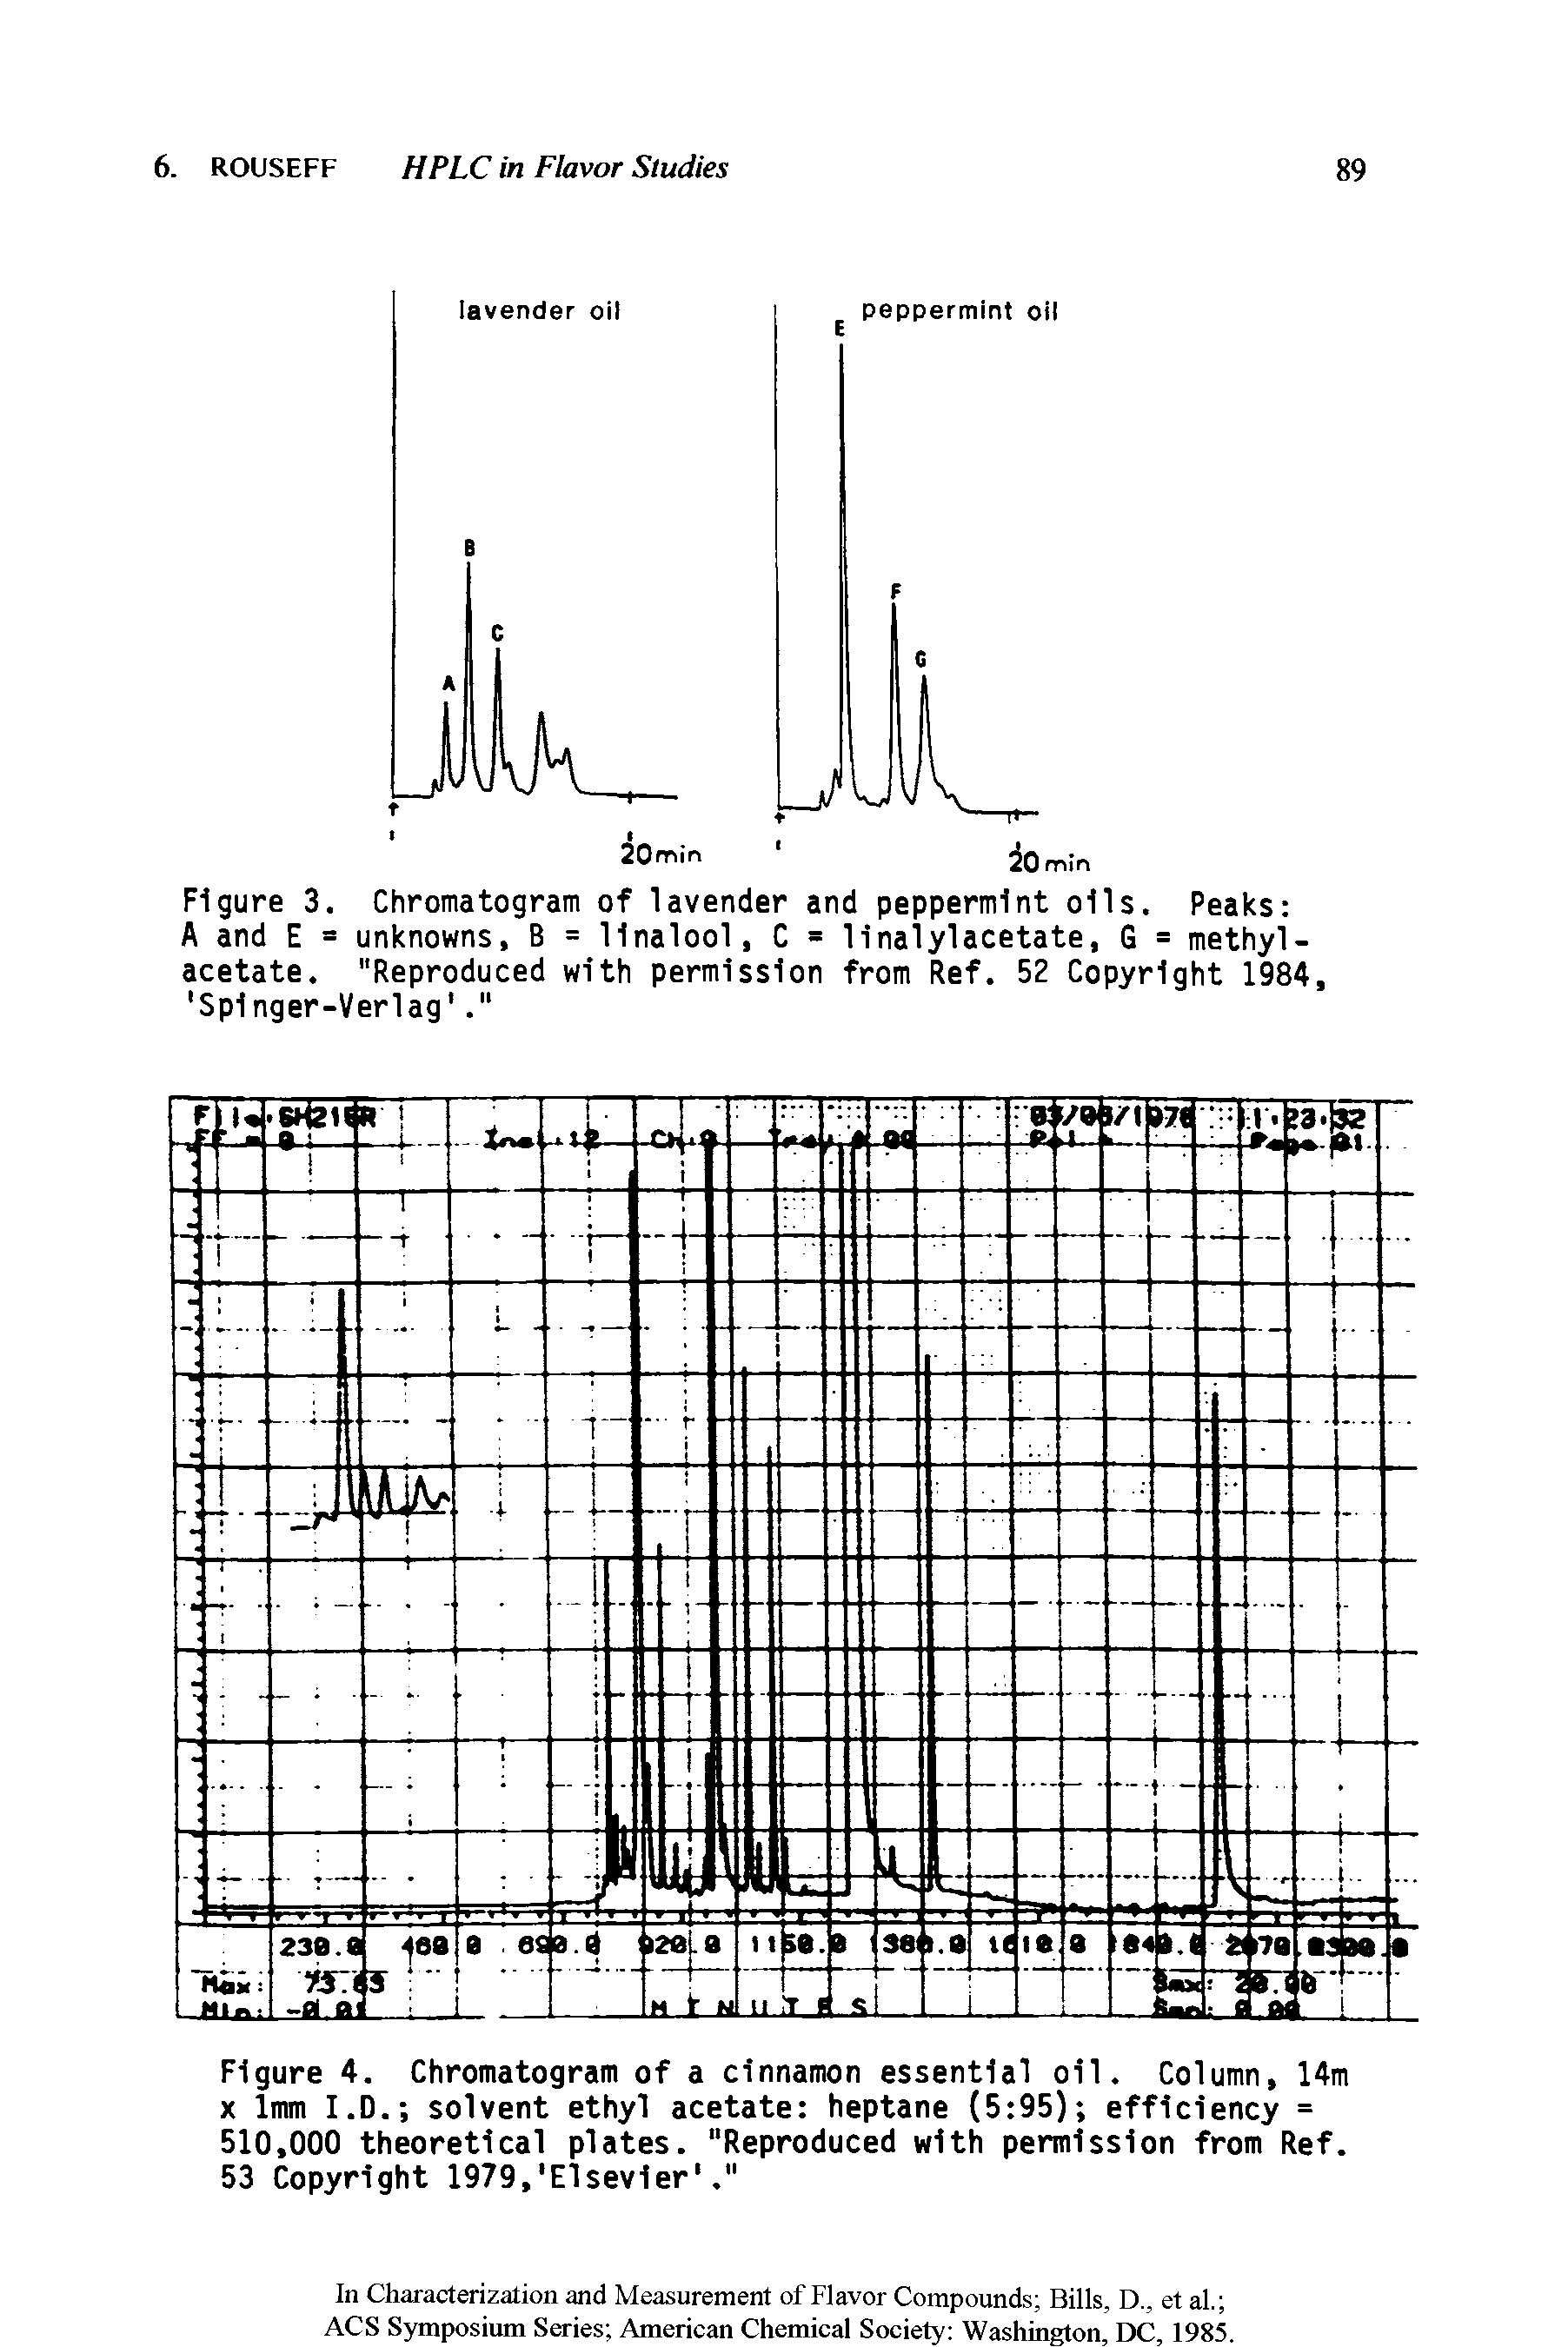 Figure 4. Chromatogram of a cinnamon essential oil. Column, 14m x 1mm I.D. solvent ethyl acetate heptane (5 95) efficiency = 510,000 theoretical plates. "Reproduced with permission from Ref. 53 Copyright 1979, Elsevier ...